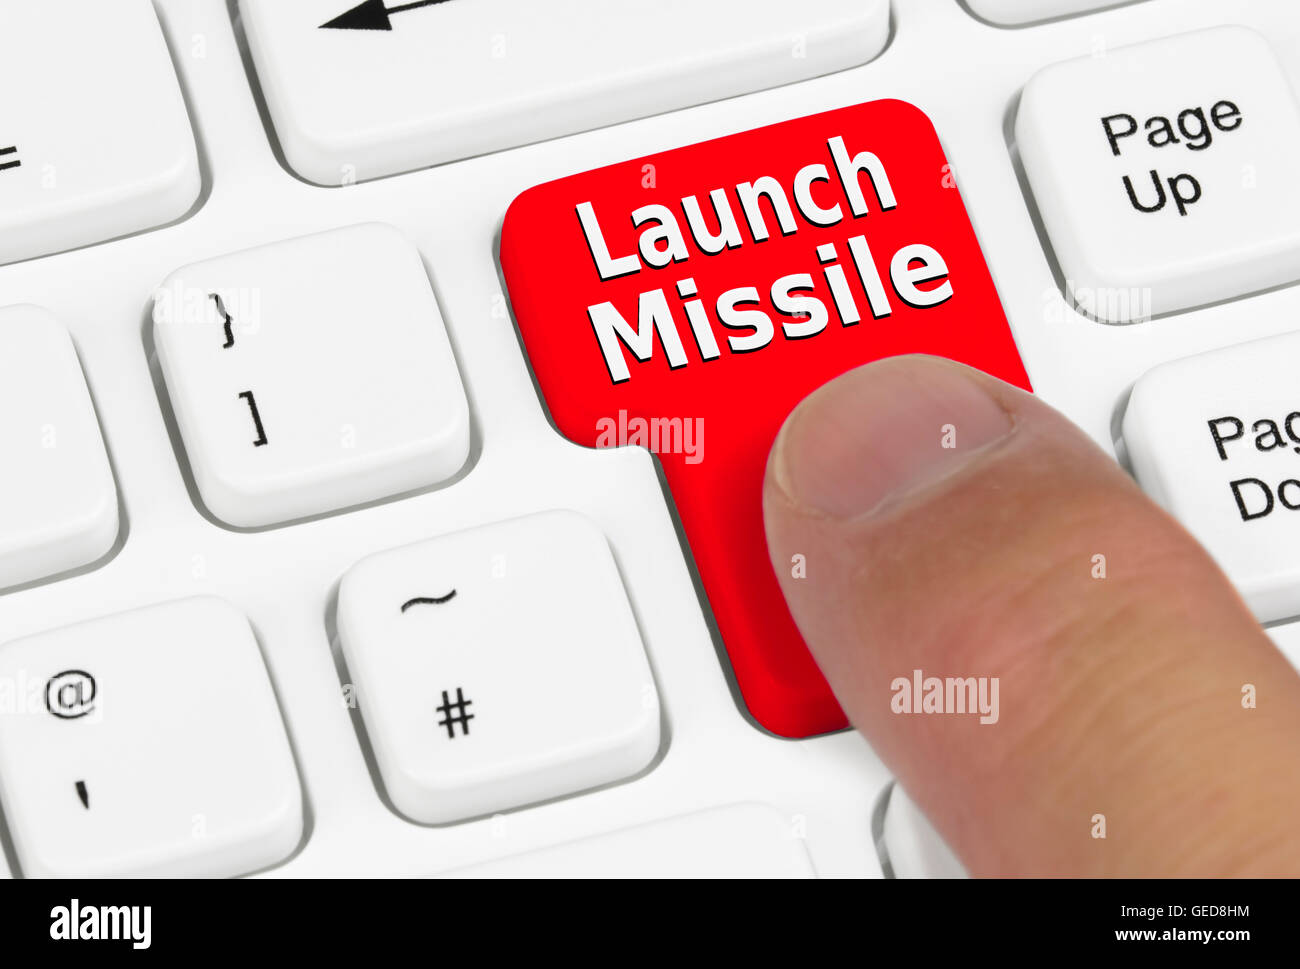 launch-missile-button-being-pressed-GED8HM.jpg